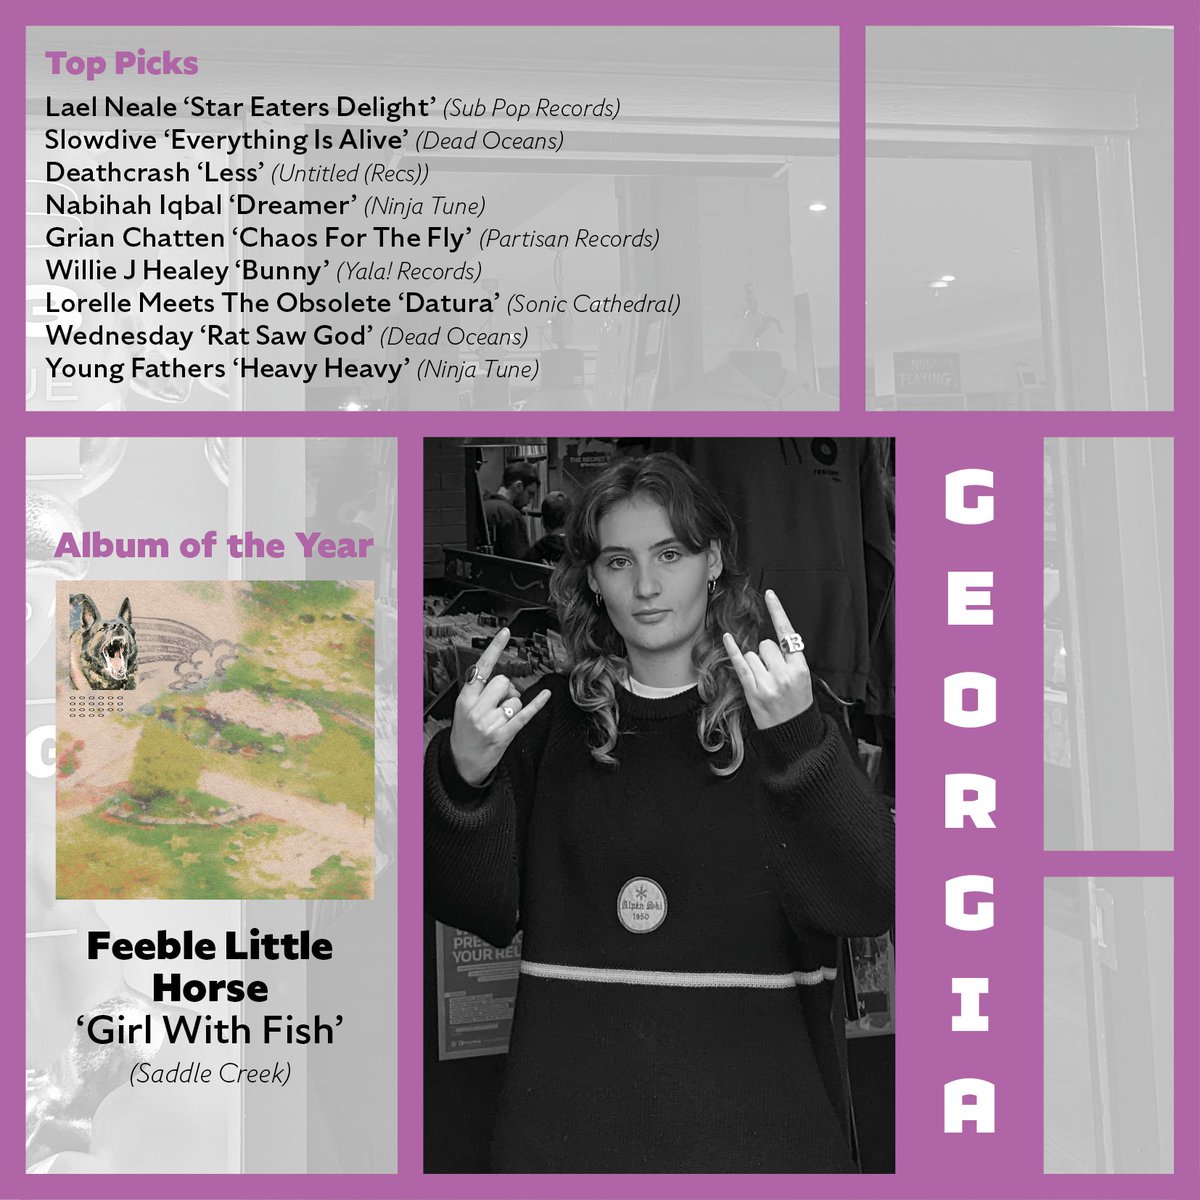 🎄Resident's Staff Picks Advent Calendar🎄 Day 7 - Georgia Highlight of the Year - 'Spending time in the studio recording music with my pals!' Check out her albums of the year 👇 resident-music.com/collection&pat…